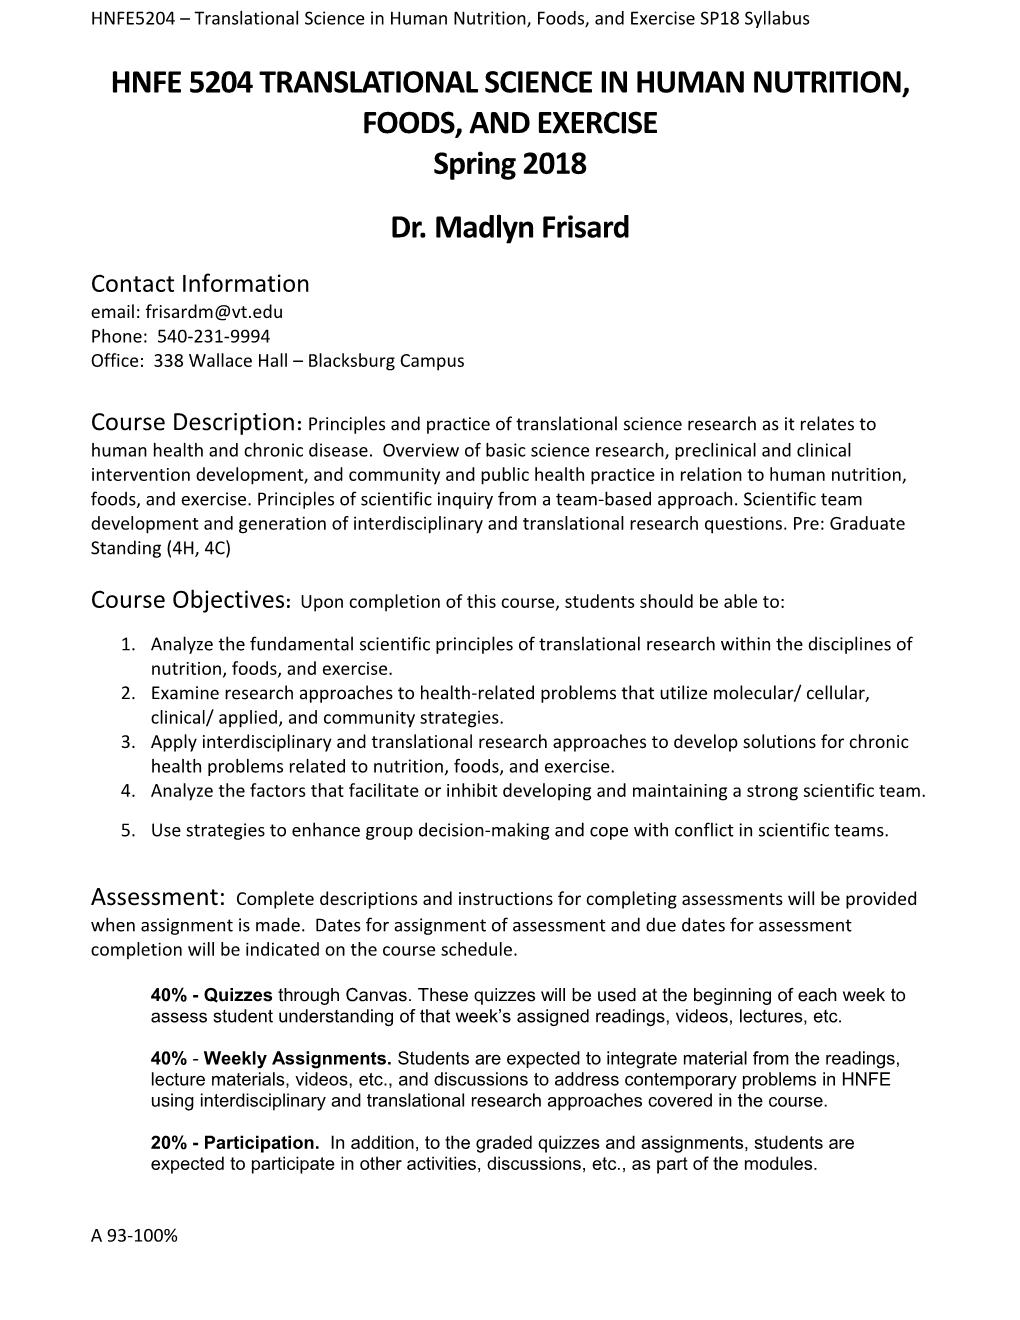 HNFE5204 Translational Science in Human Nutrition, Foods, and Exercisesp18 Syllabus